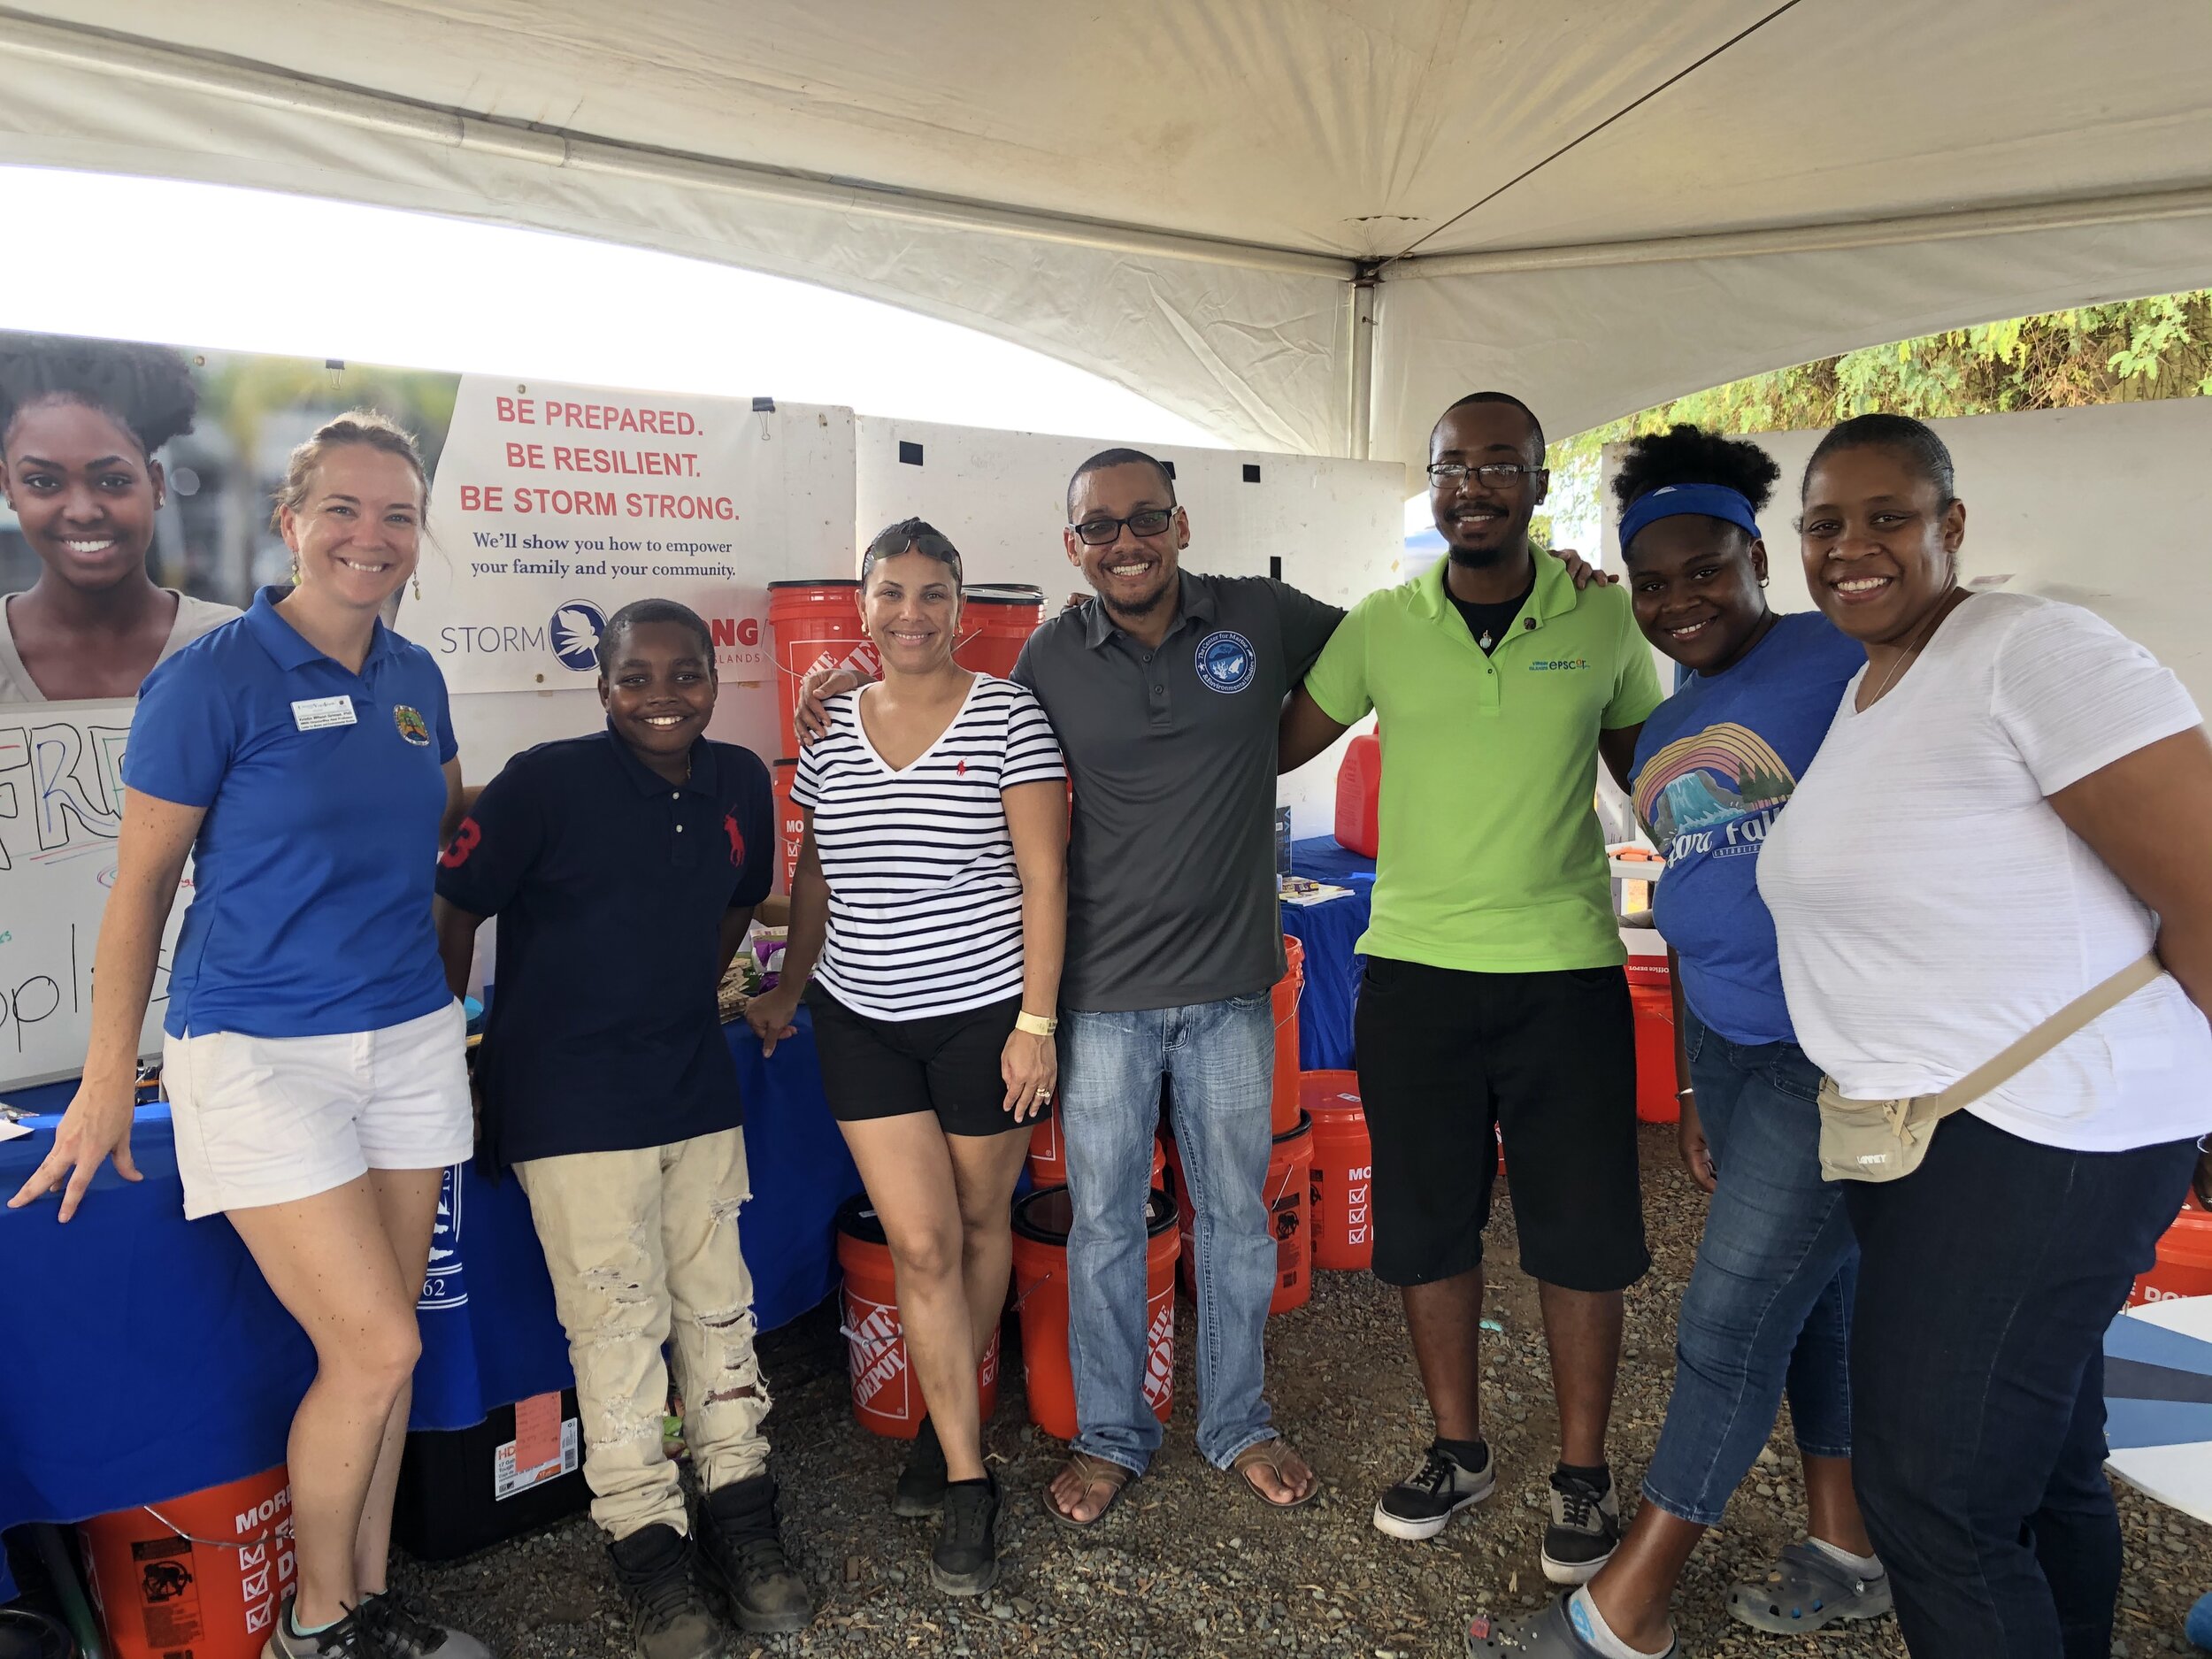   USVI Storm Strong Program participants and project team members who ran the CTP distribution at the 2019 St. Thomas &amp; St. John Agricultural Fair. (From left to right: Kristin Wilson Grimes, Ian Wallen, Jessica LaPlace, Howard Forbes, Jr., Jarvo